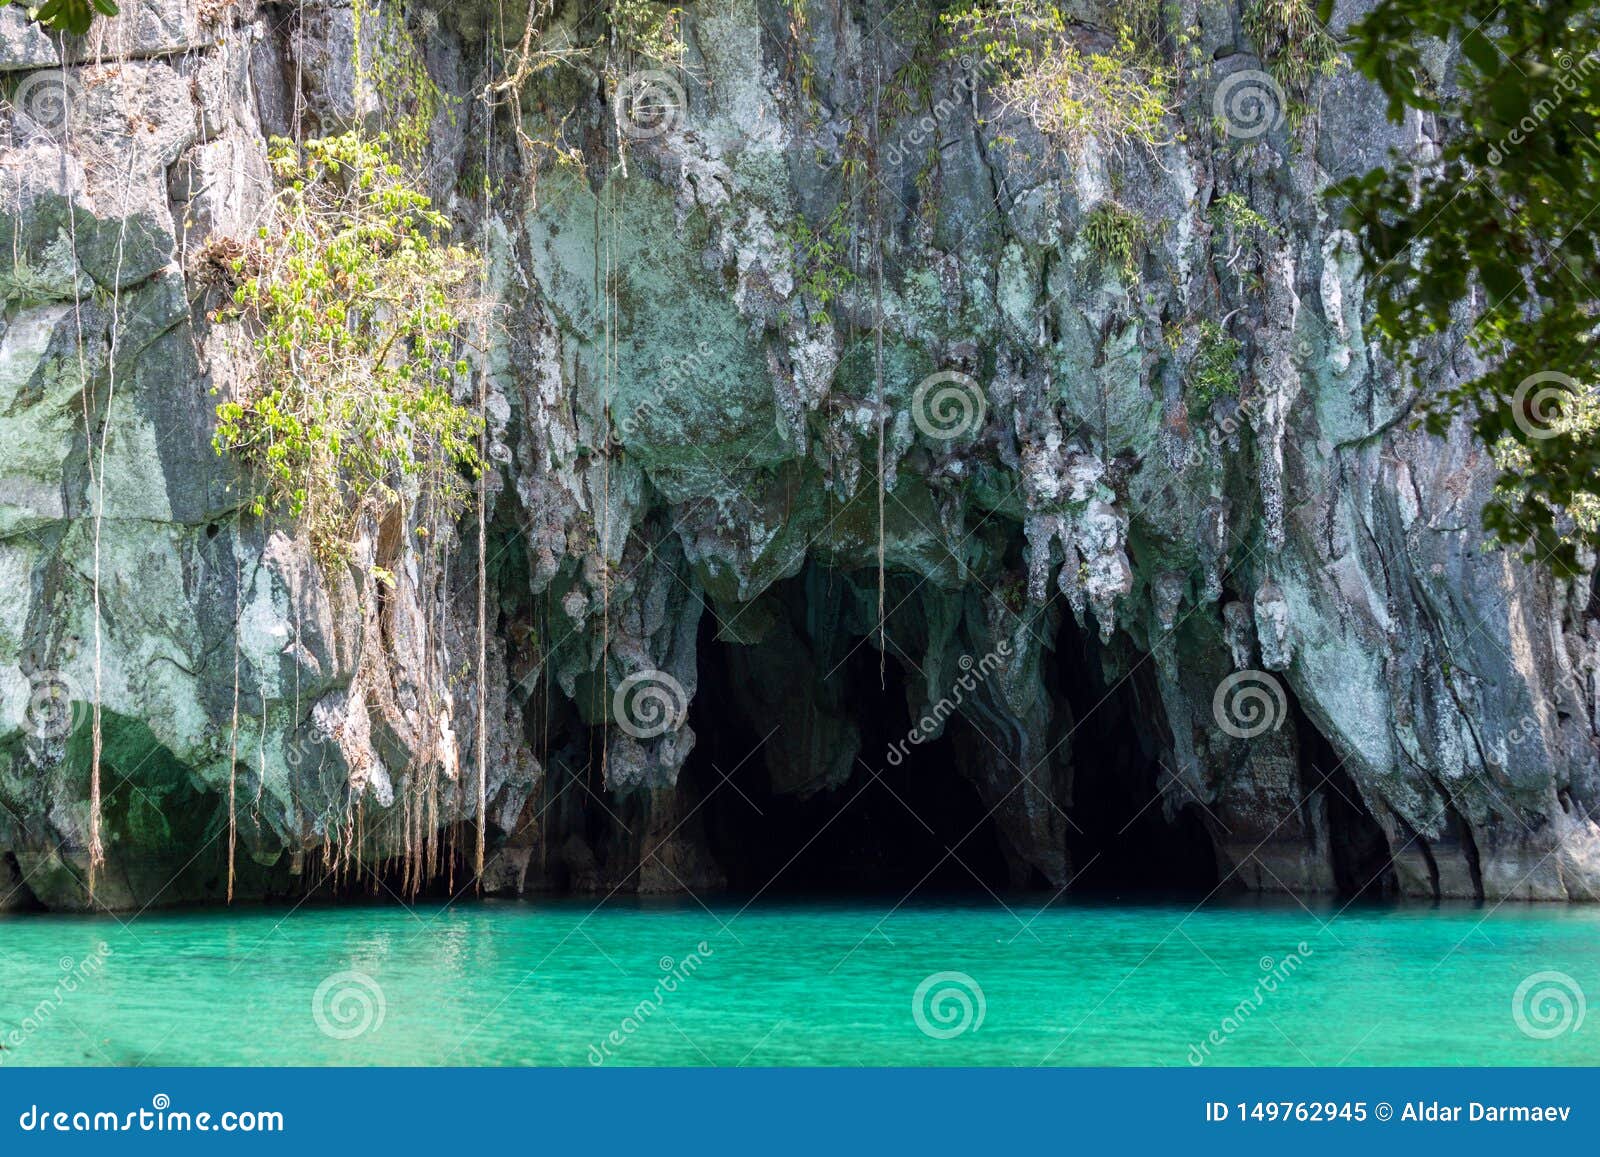 the entrance to the underground river in puerto princesa subterranean river national park, palawan, philippines